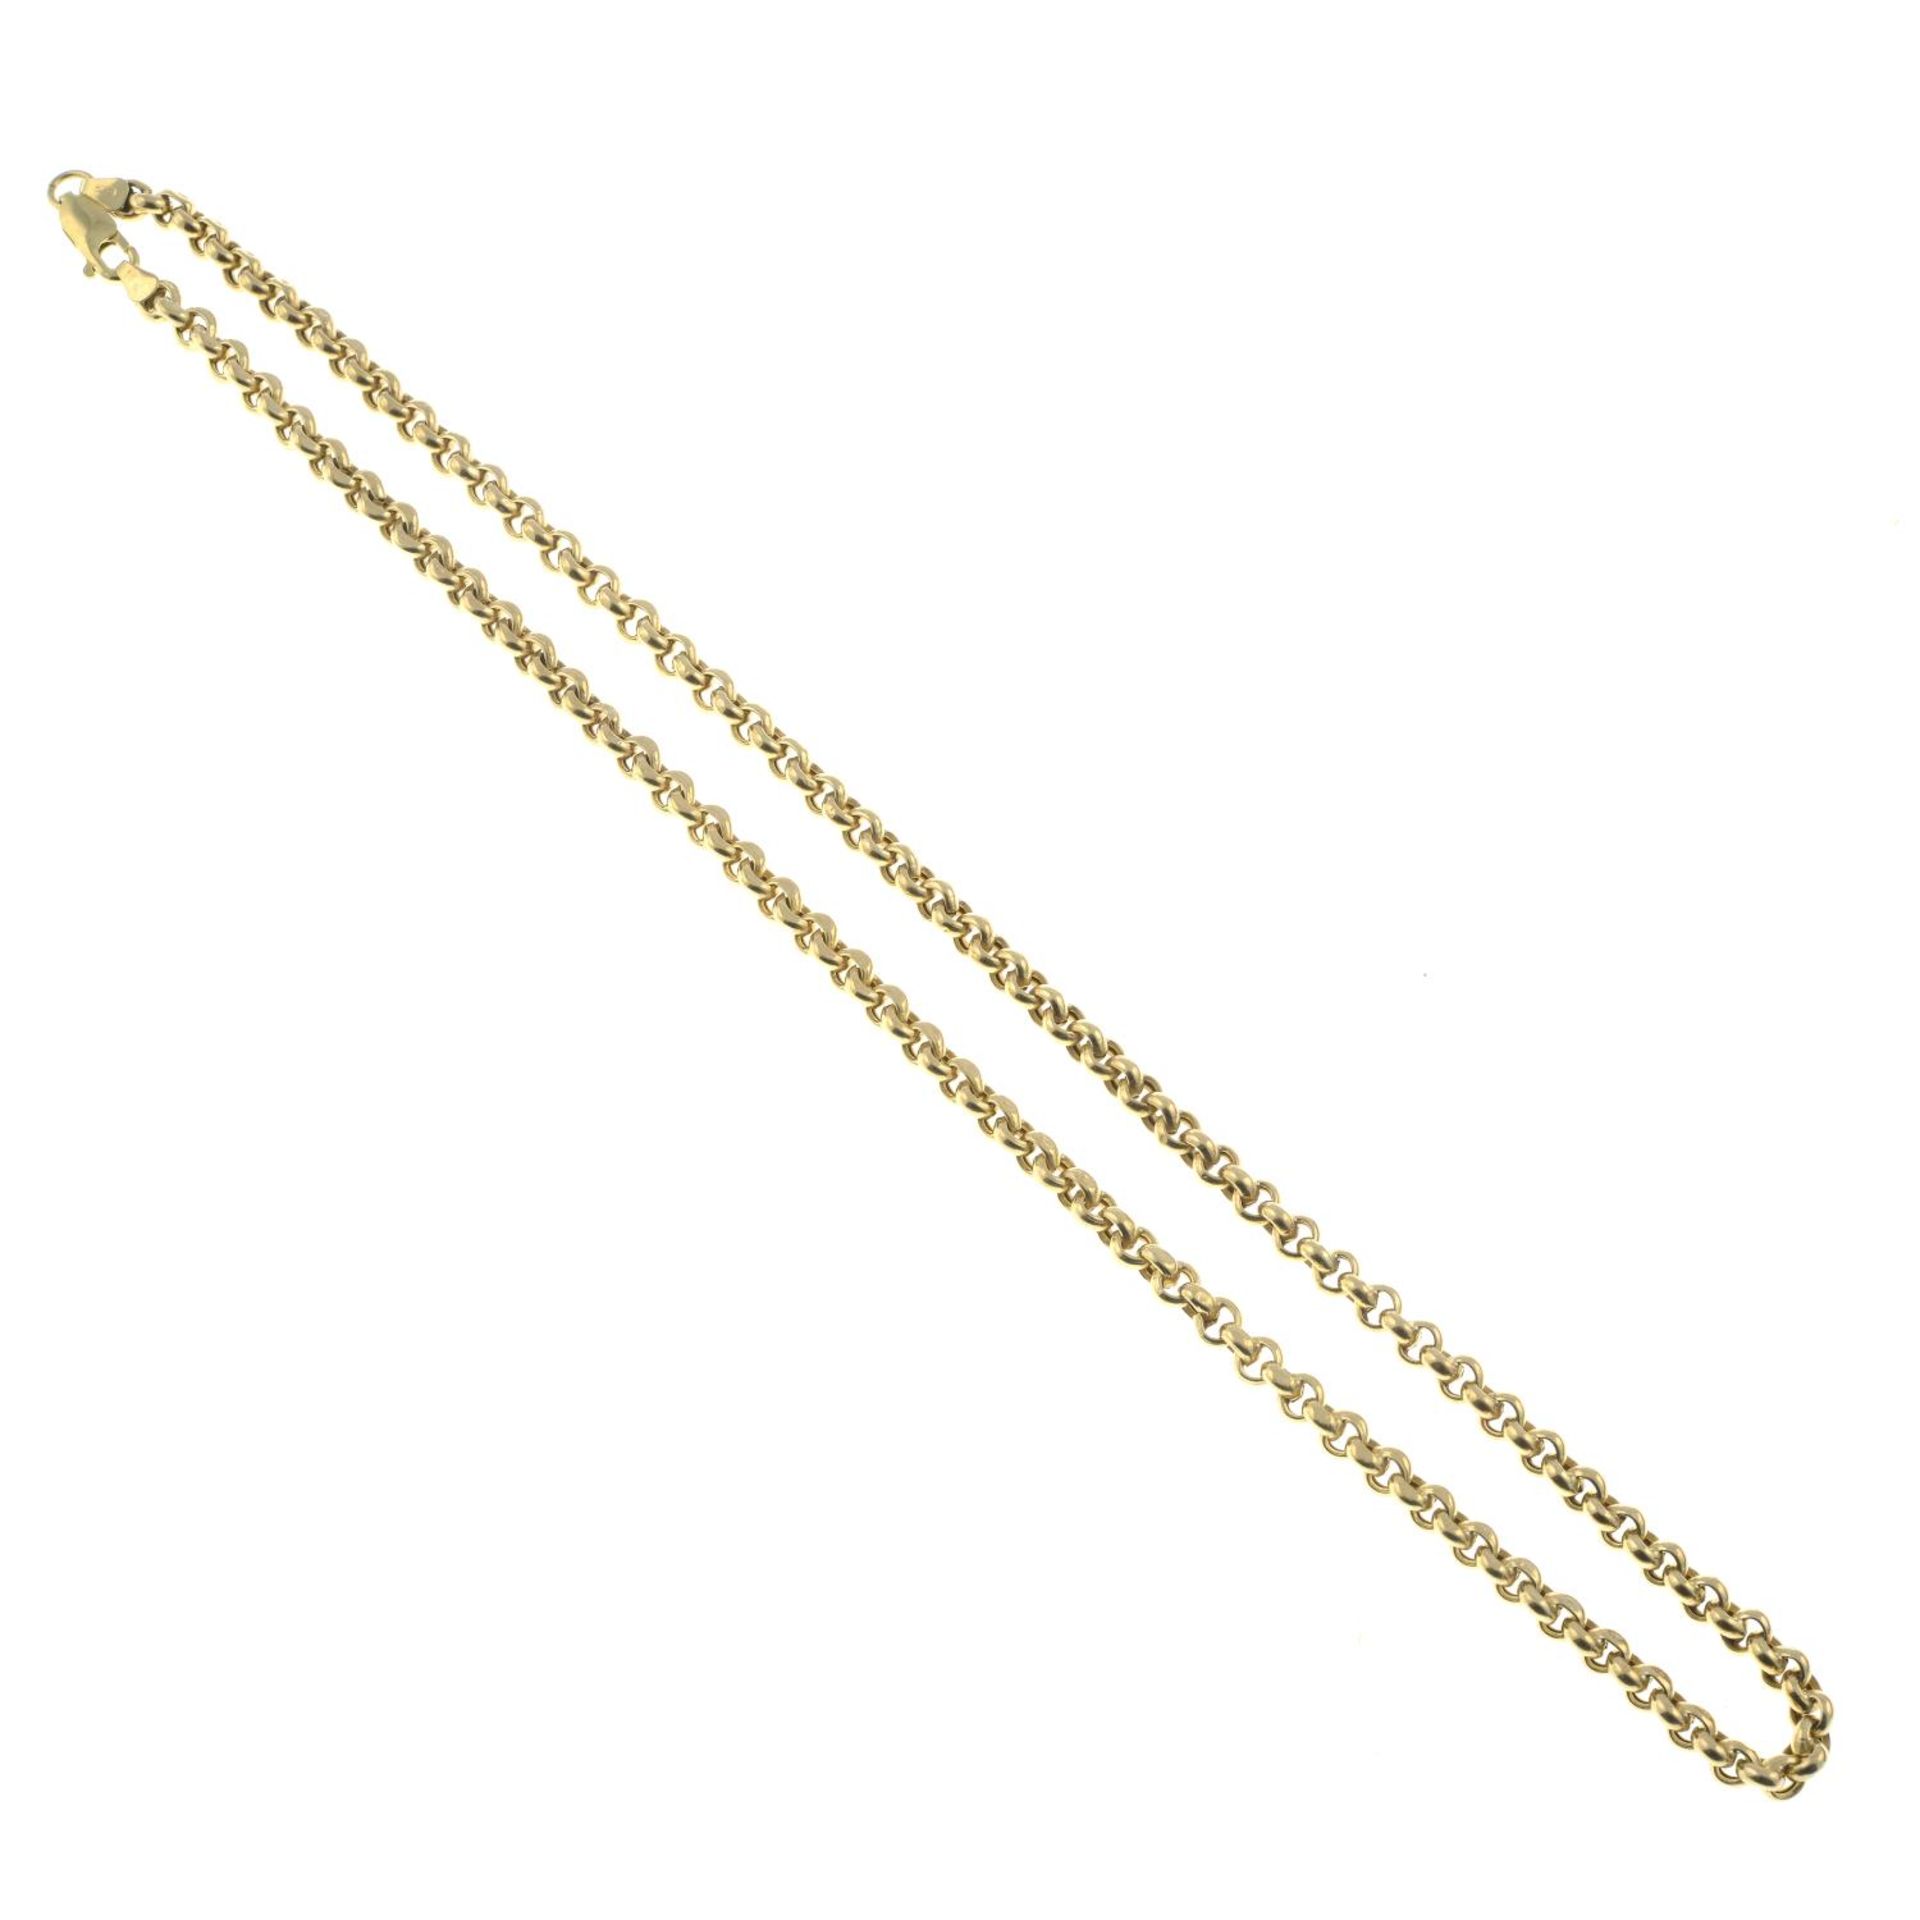 A 9ct gold belcher-link chain.Hallmarks for 9ct gold. - Image 2 of 2